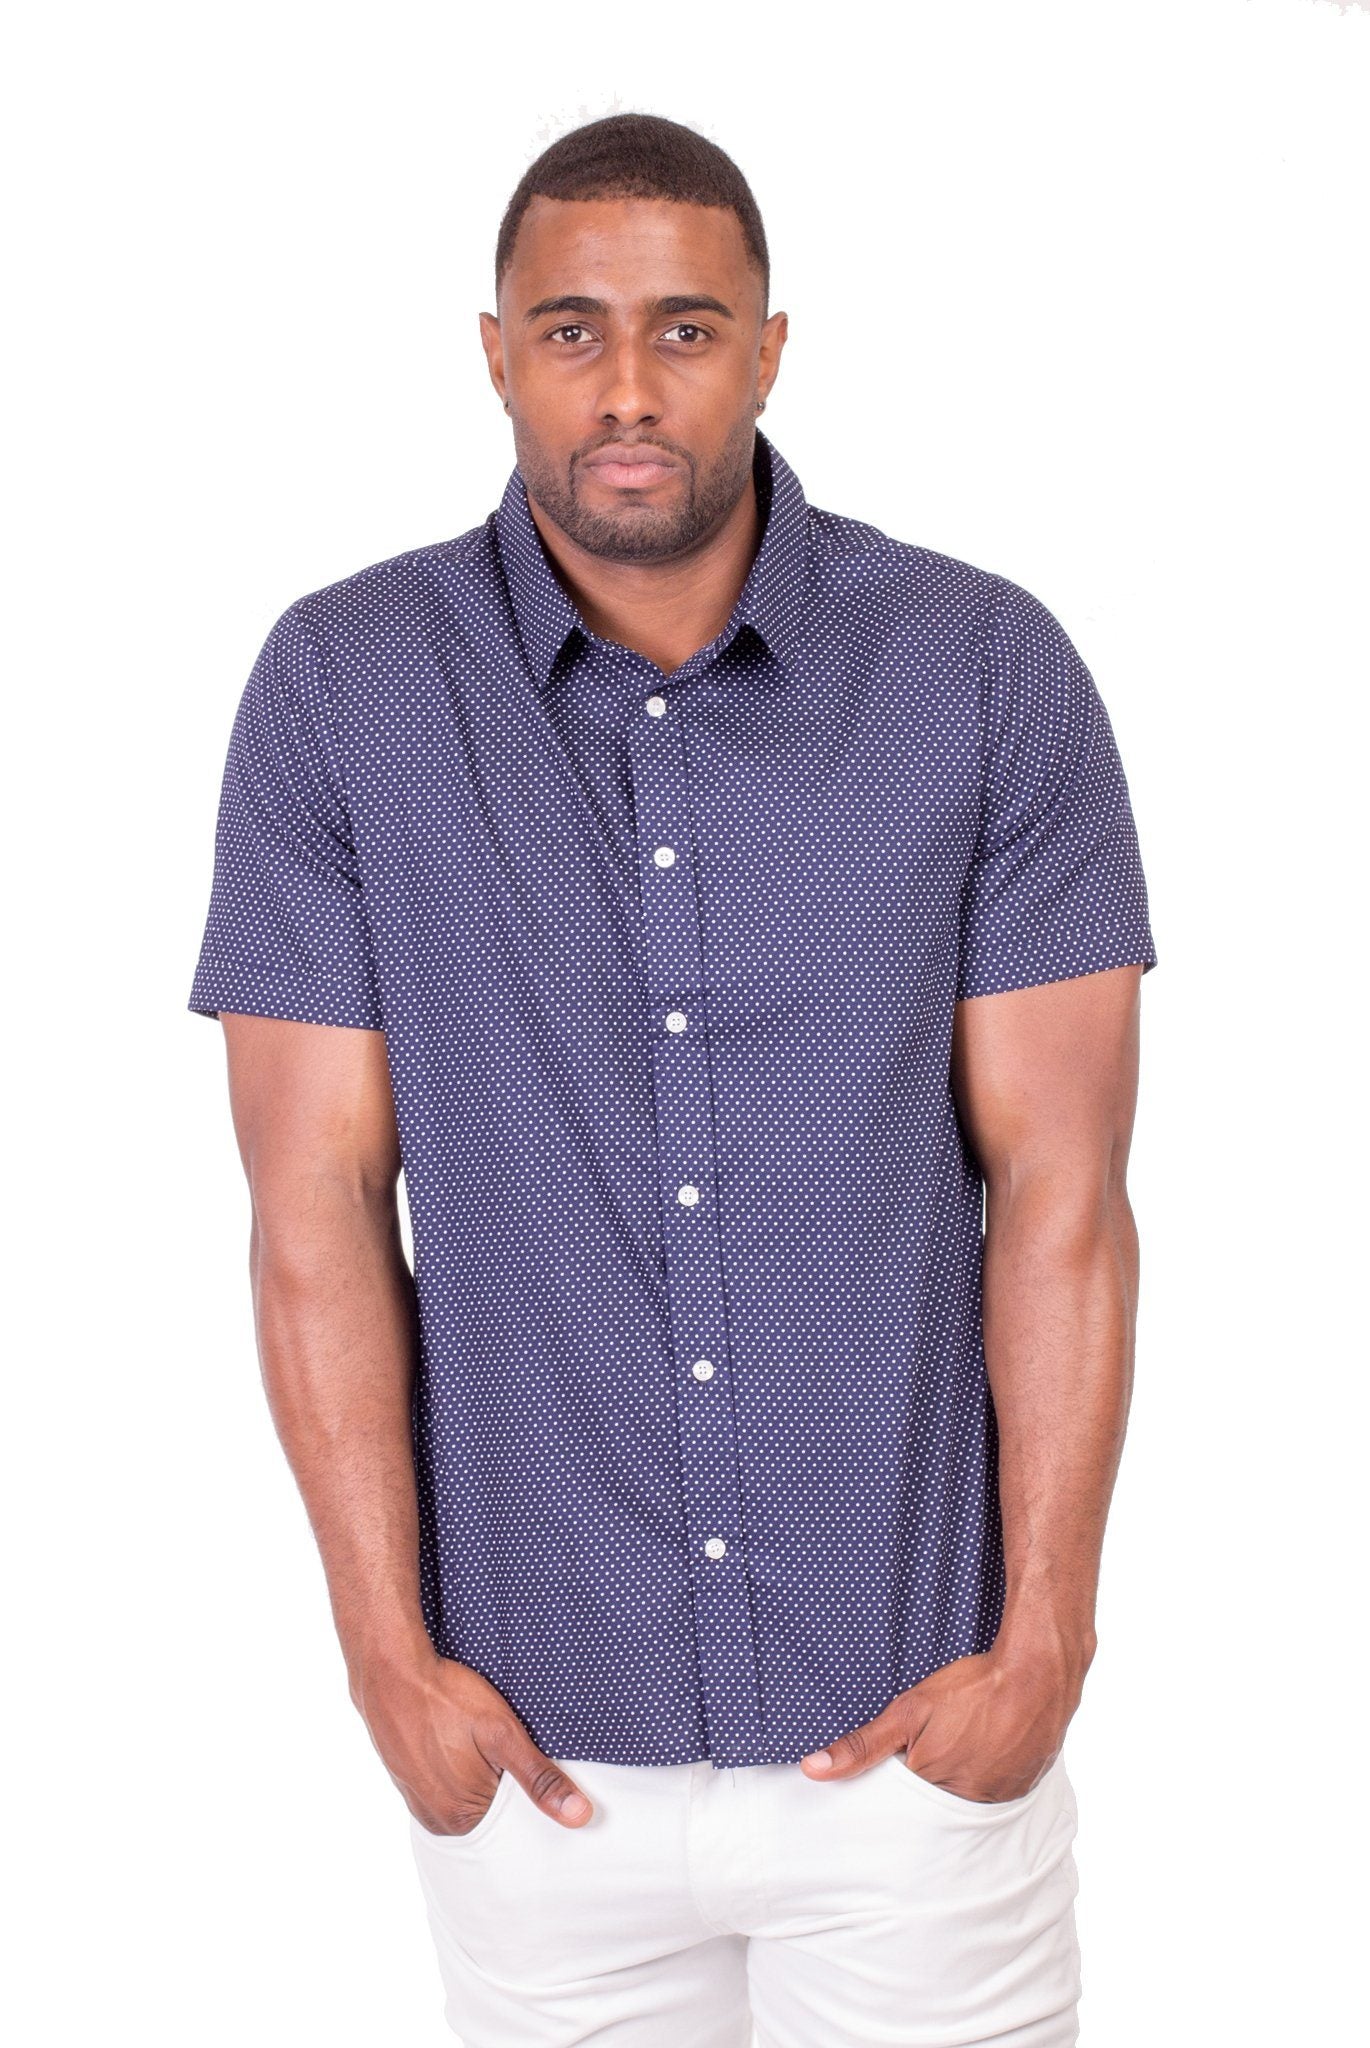 NAVY AND WHITE POLKA-DOT SHORT SLEEVE SHIRT | Poor Little Rich Boy Clothing